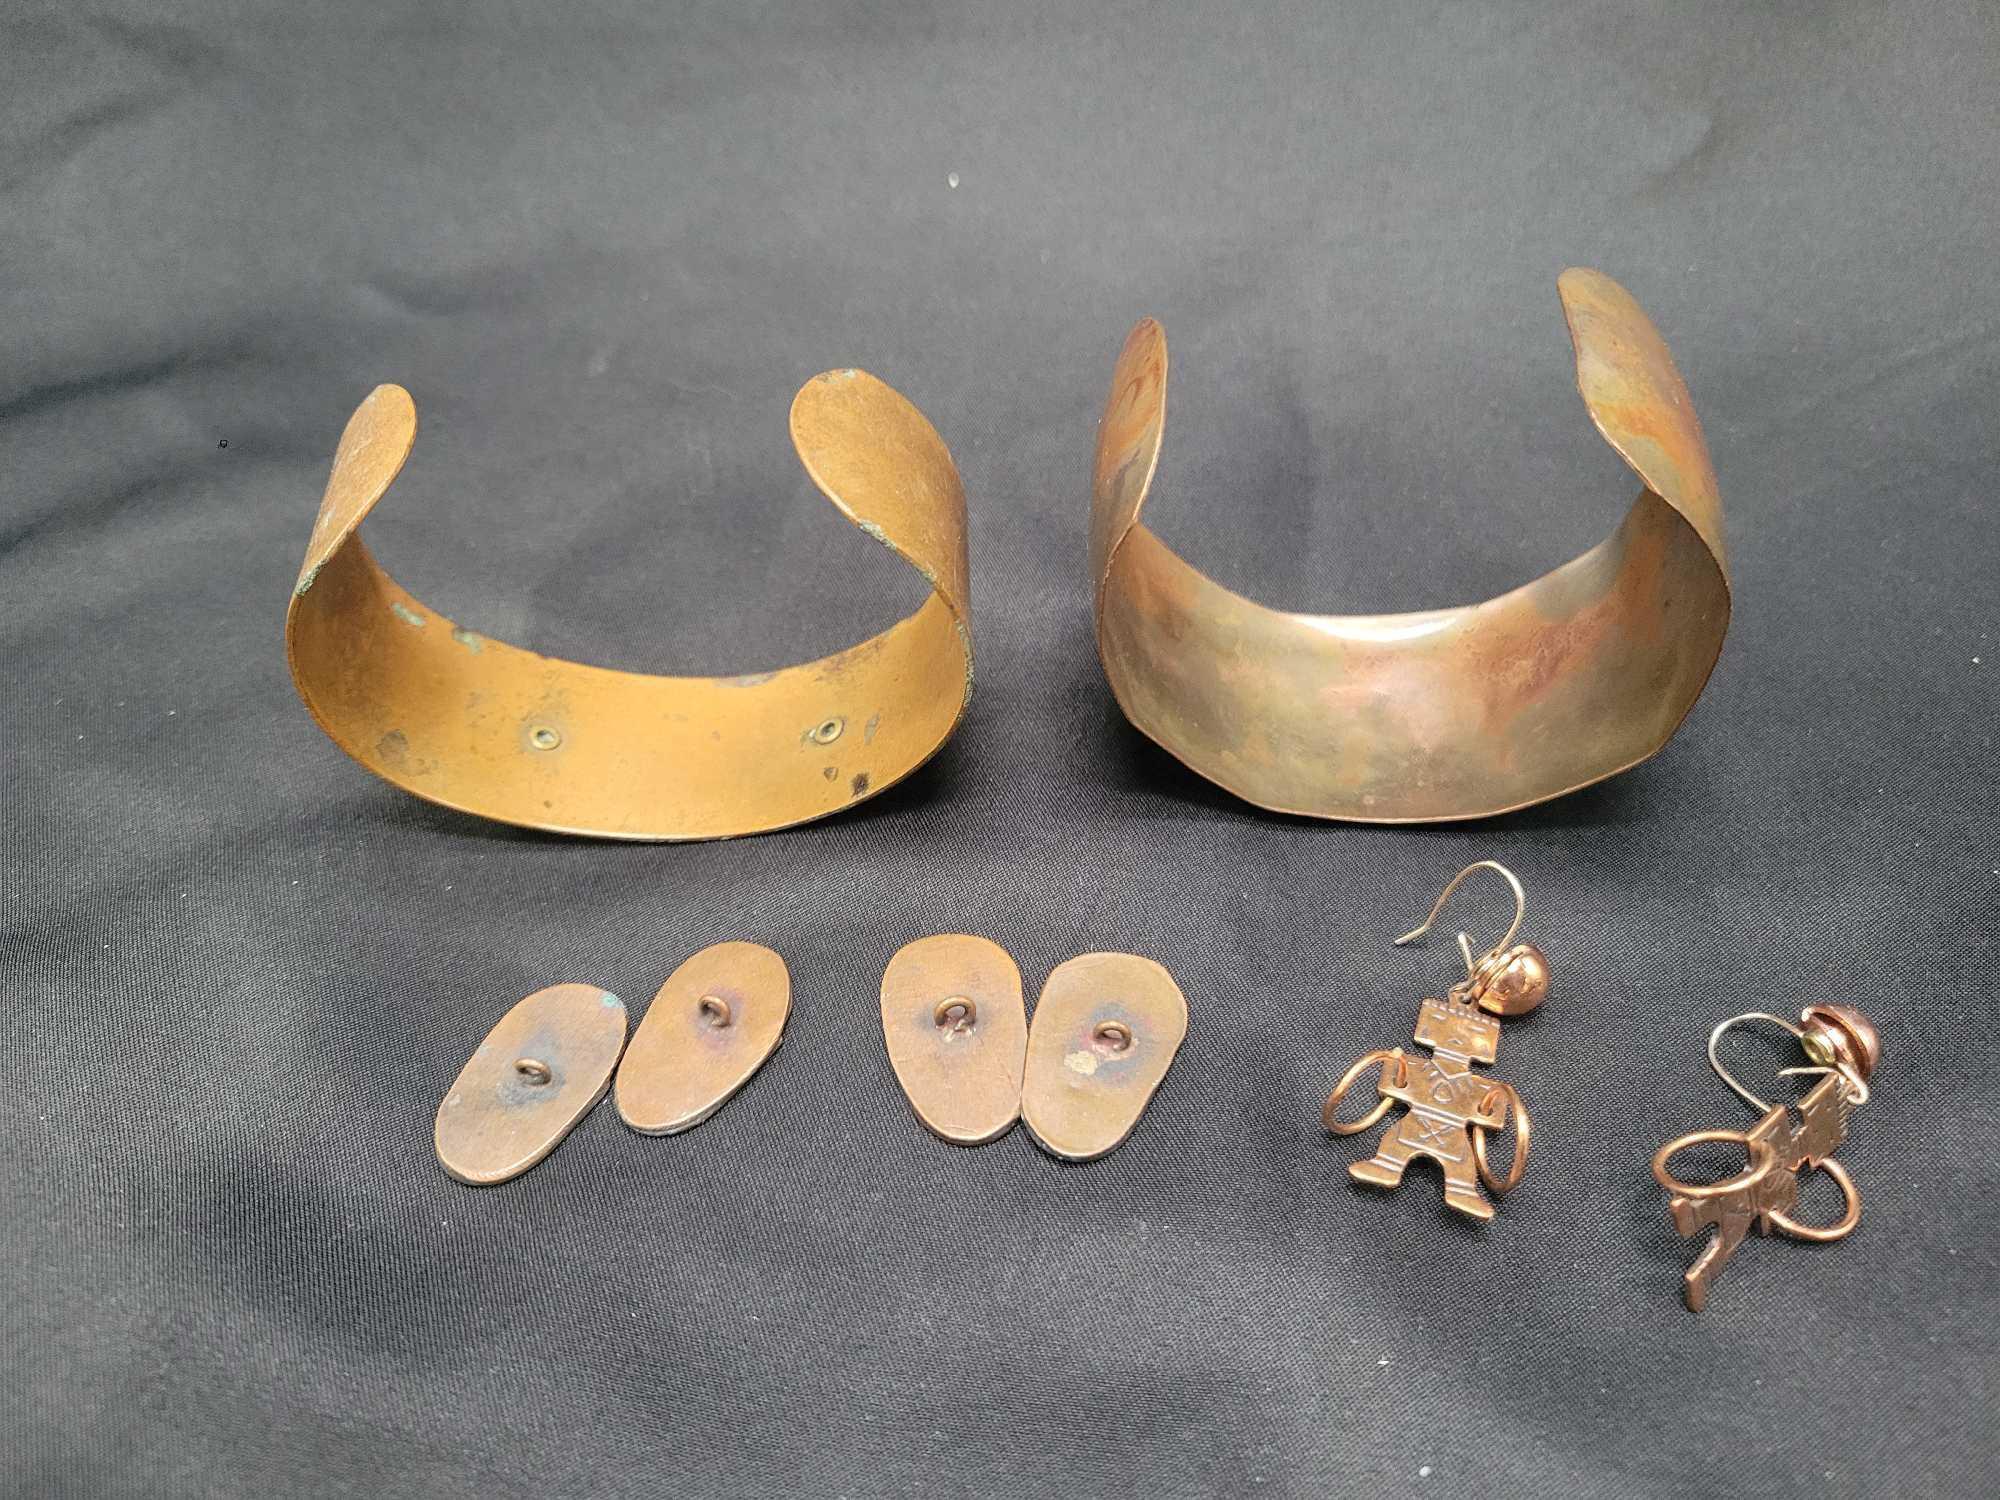 Vintage Mexican, Southwestern style copper cuff bracelets and jewelry